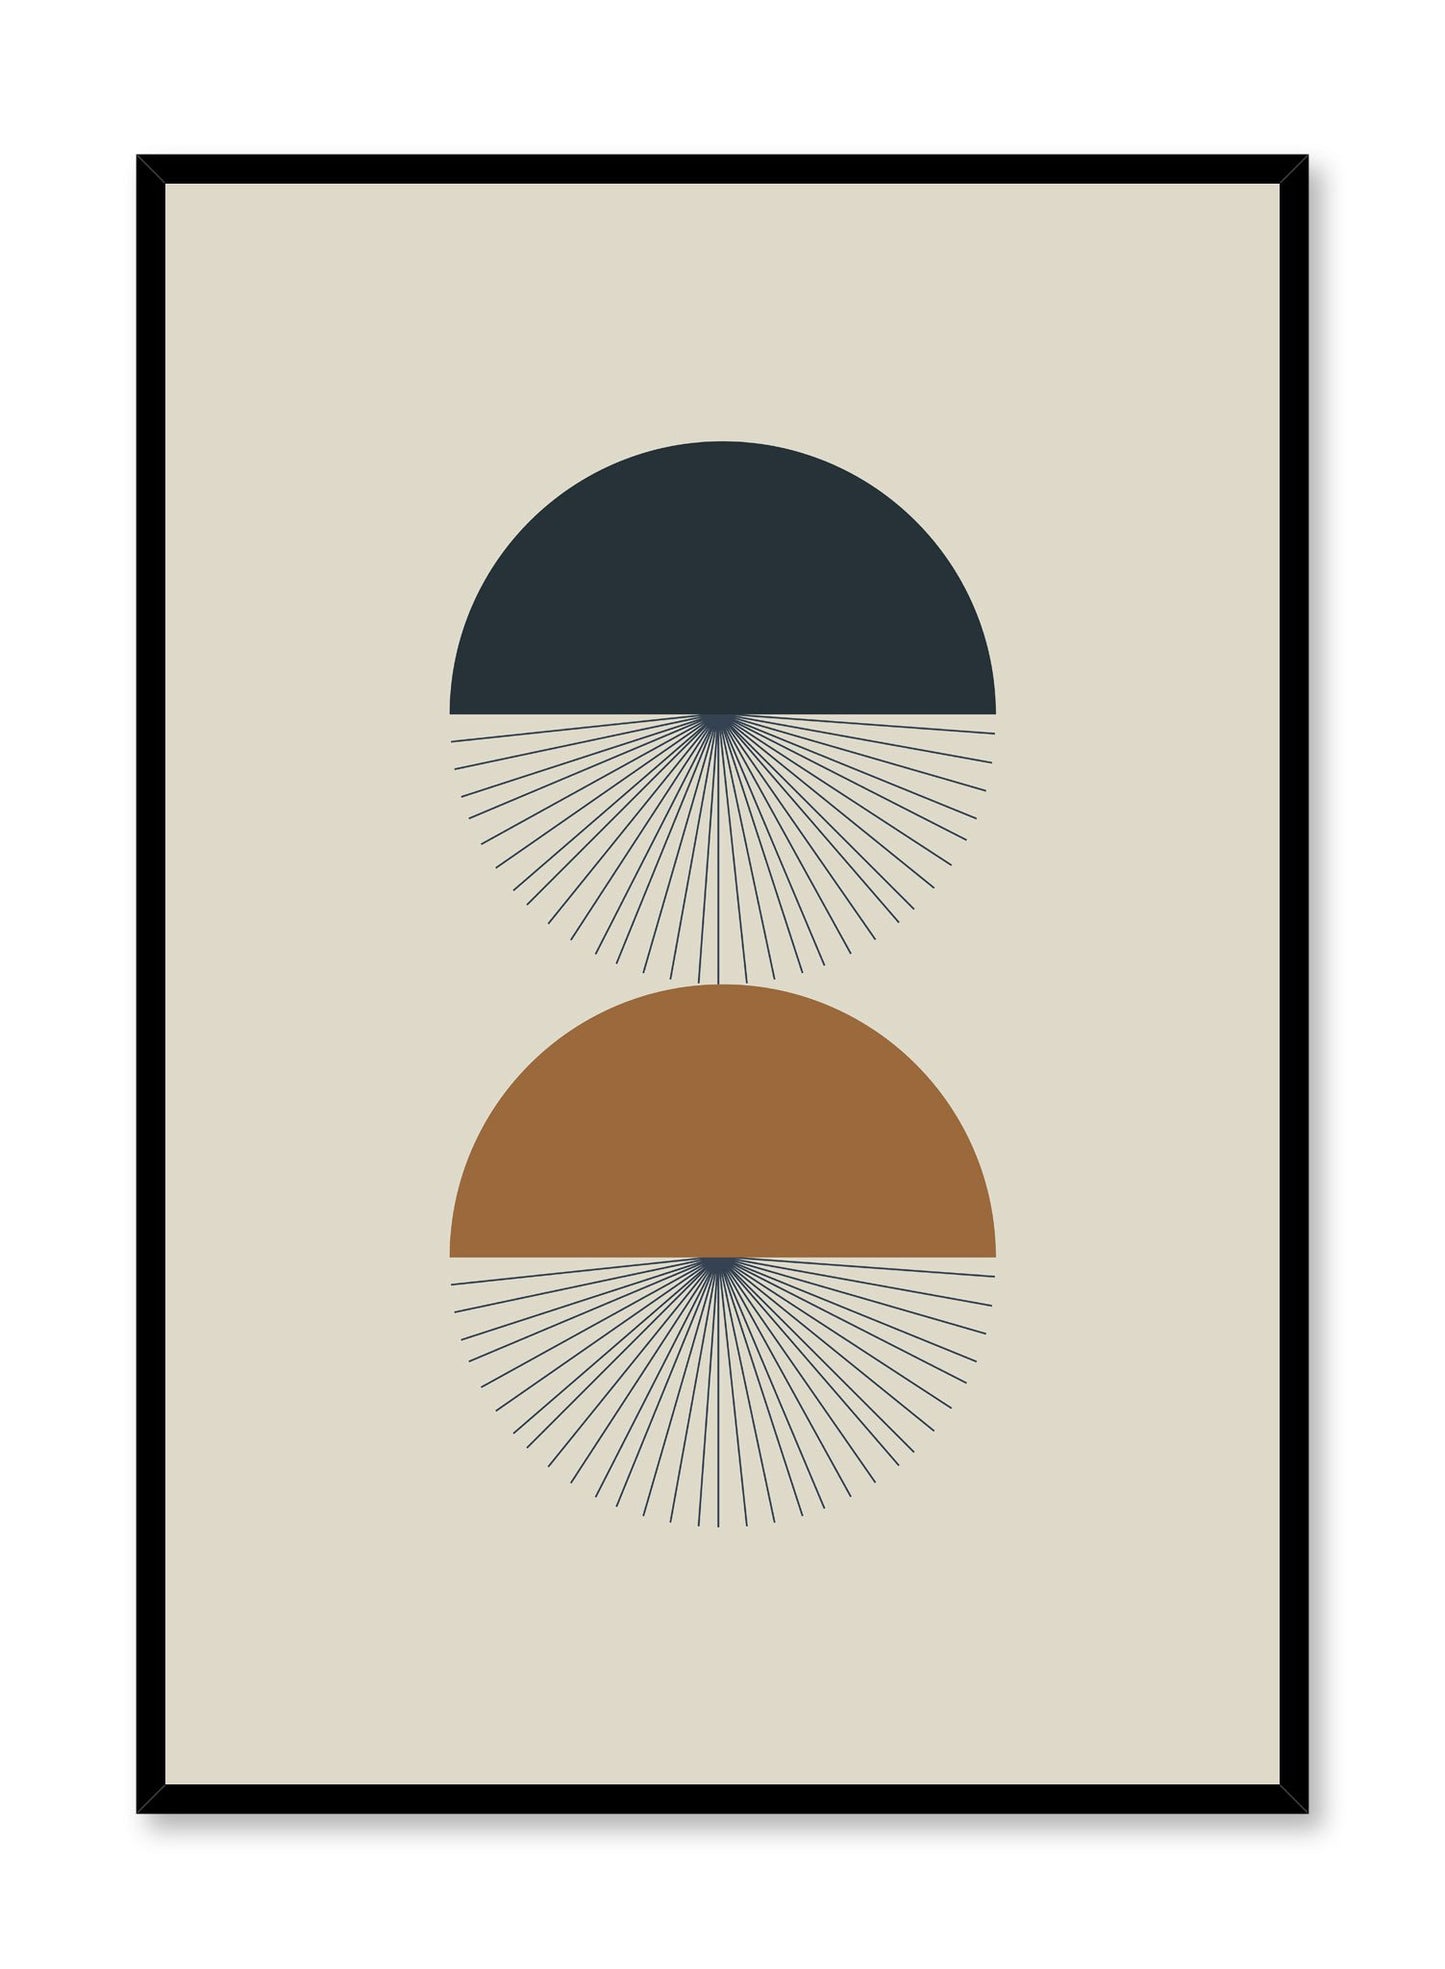 Minimalist design poster by Opposite Wall with Swift Motion abstract graphic design of two circles